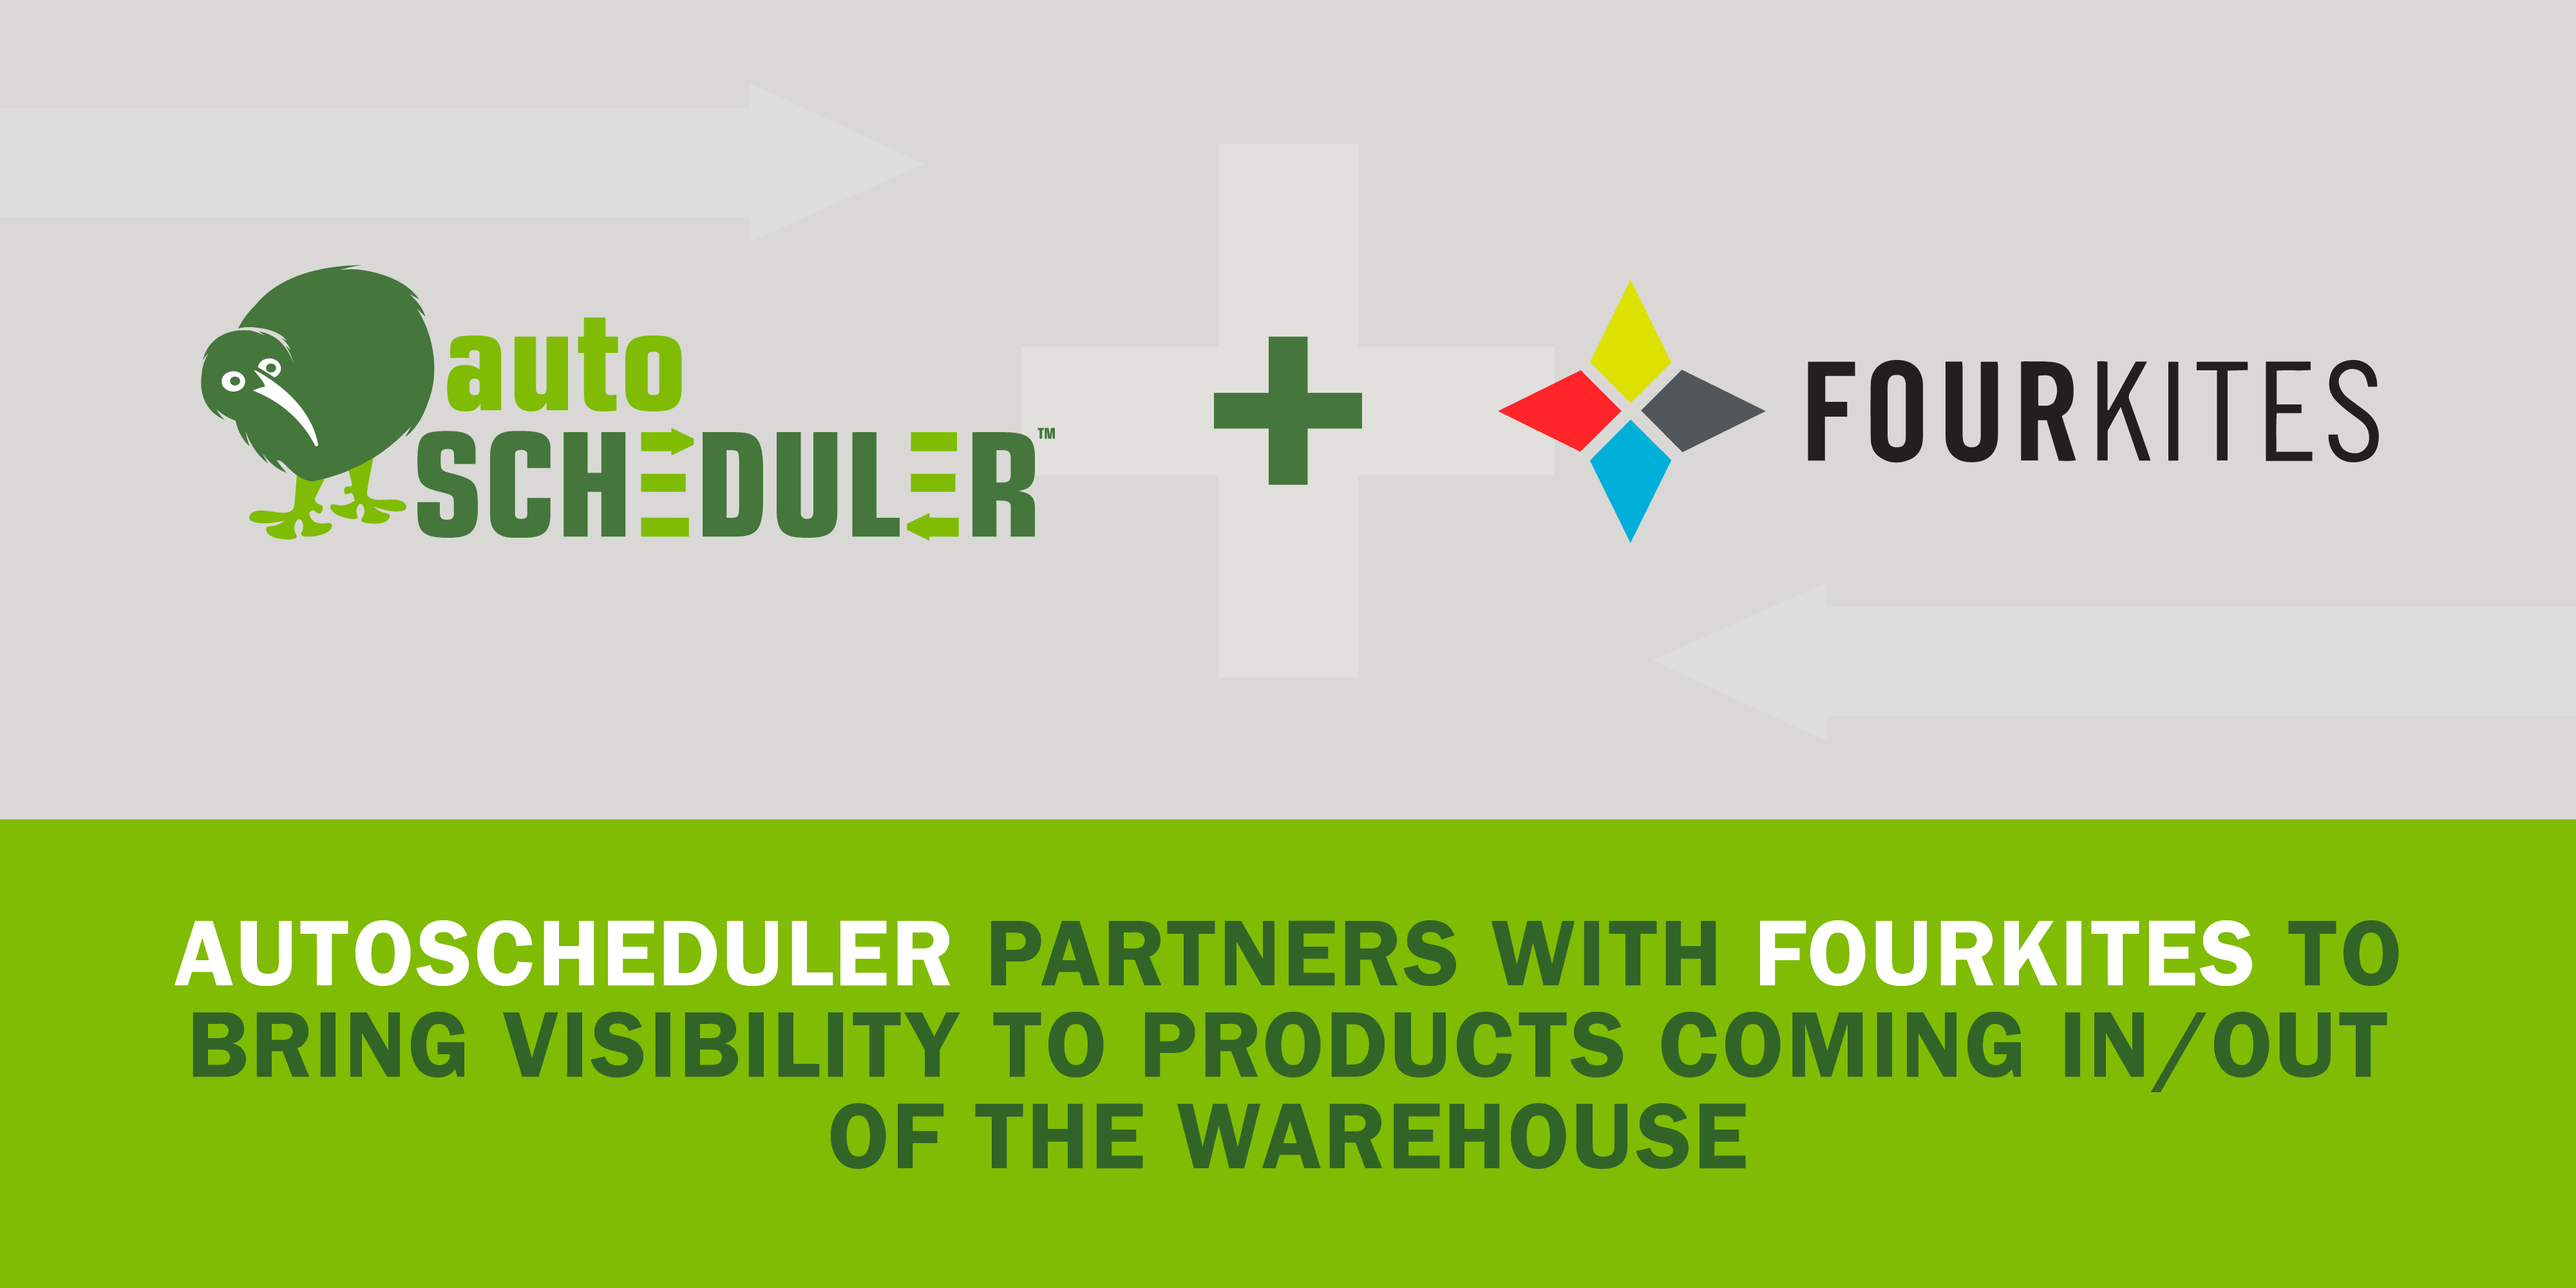 AutoScheduler Partners with FourKites to Bring Visibility to Products Coming In/Out of the Warehouse